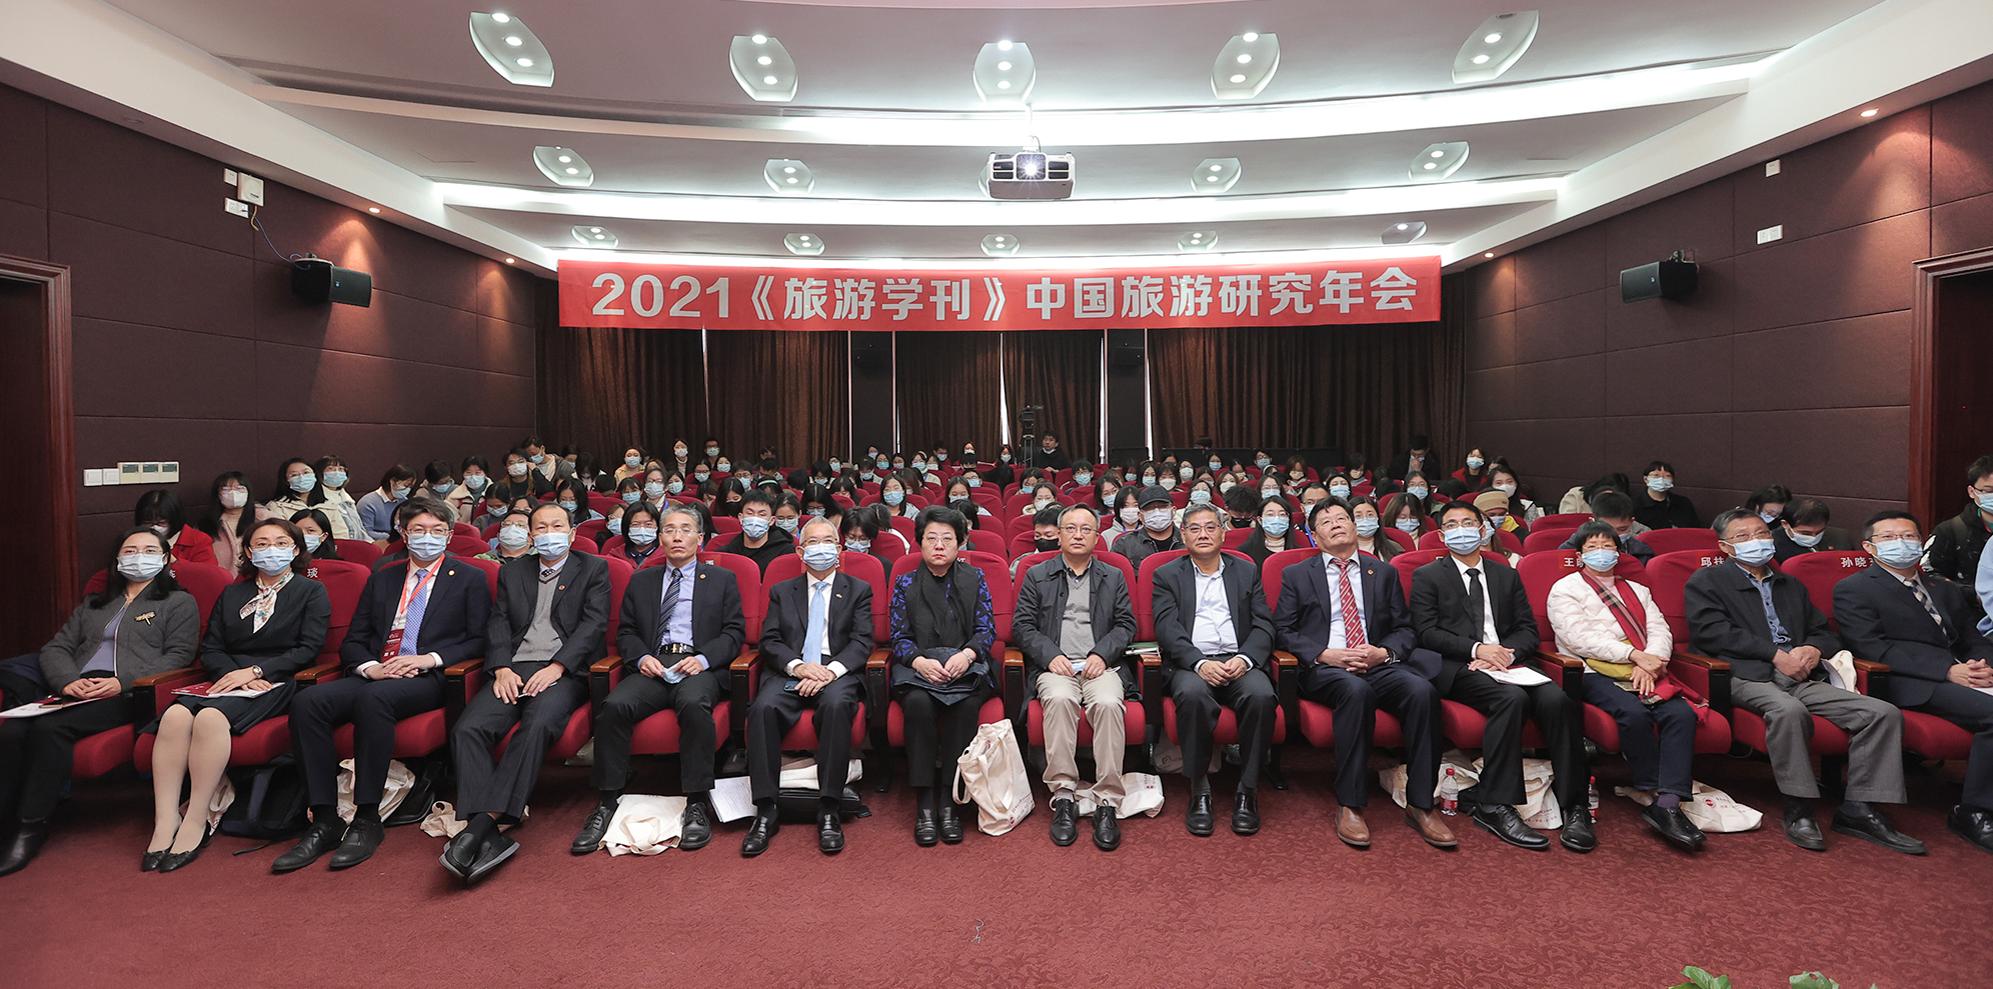 <a href='/femenglish/4c/d9/c28949a412889/page.htm' target='_blank' title='2021 Journal of Tourism Annual Conference on China Tourism Research held at East China Normal University'>2021 Journal of Tourism Annual Conference on China Tourism Research held at East China Normal University</a>